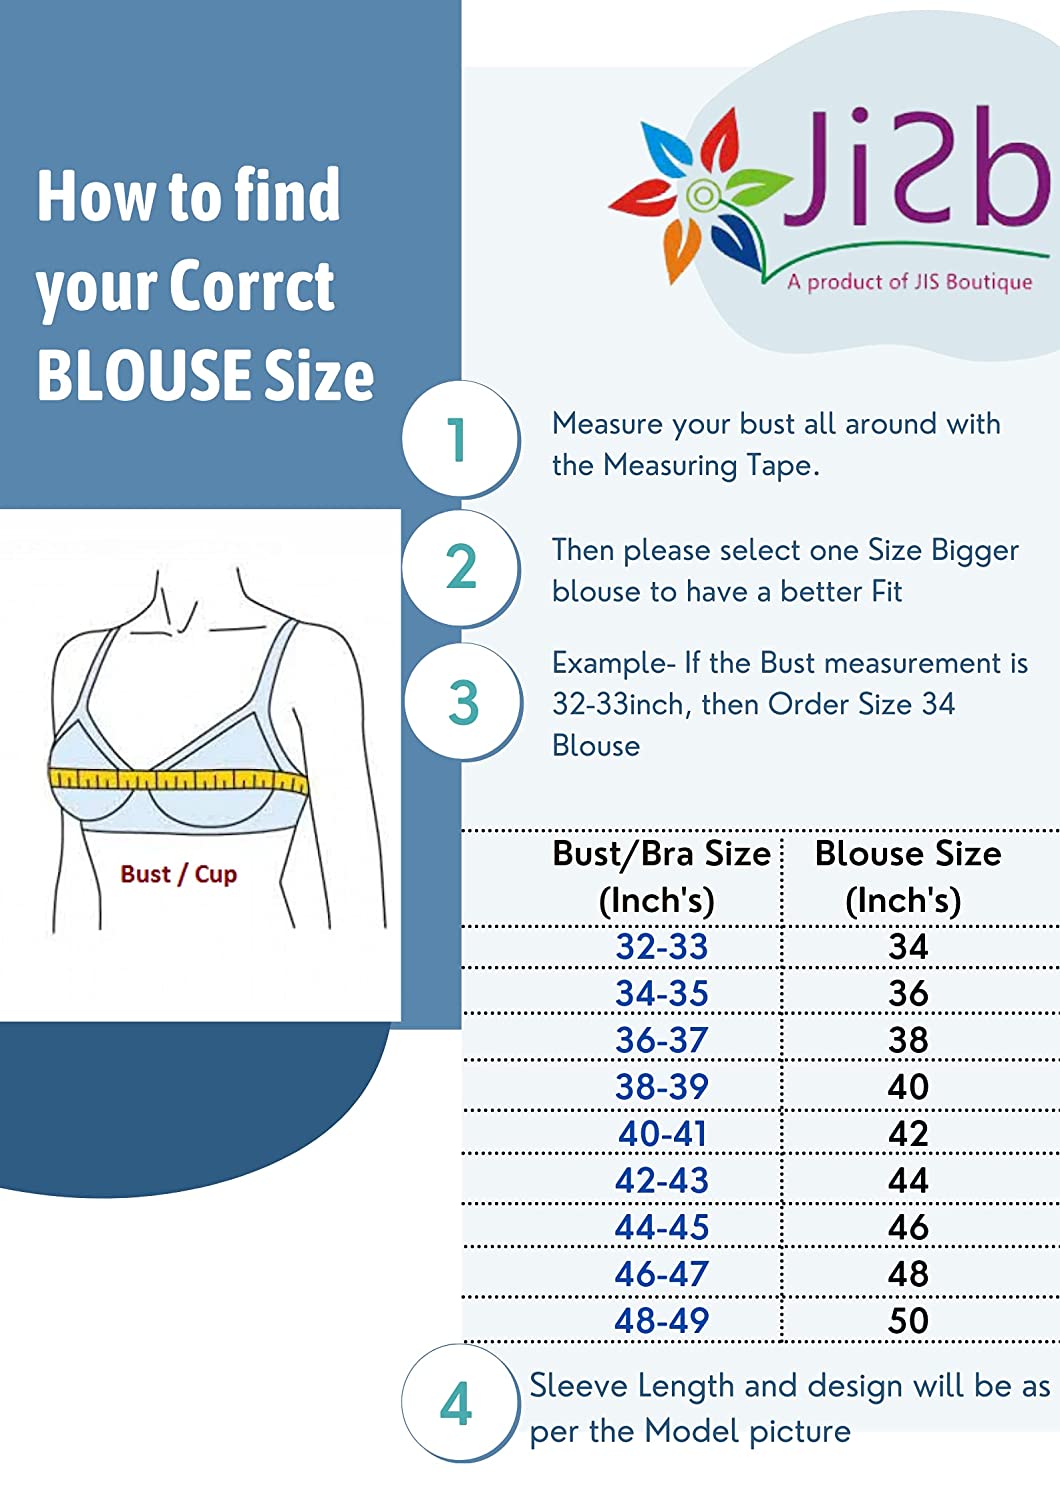 This image is an instructional guide titled "how to find your correct blouse size", presented by JIS B Stitched Tissue Blouse, Black, a product of JIS BOUTIQUE. It provides a step-by-step process for measuring the bust.